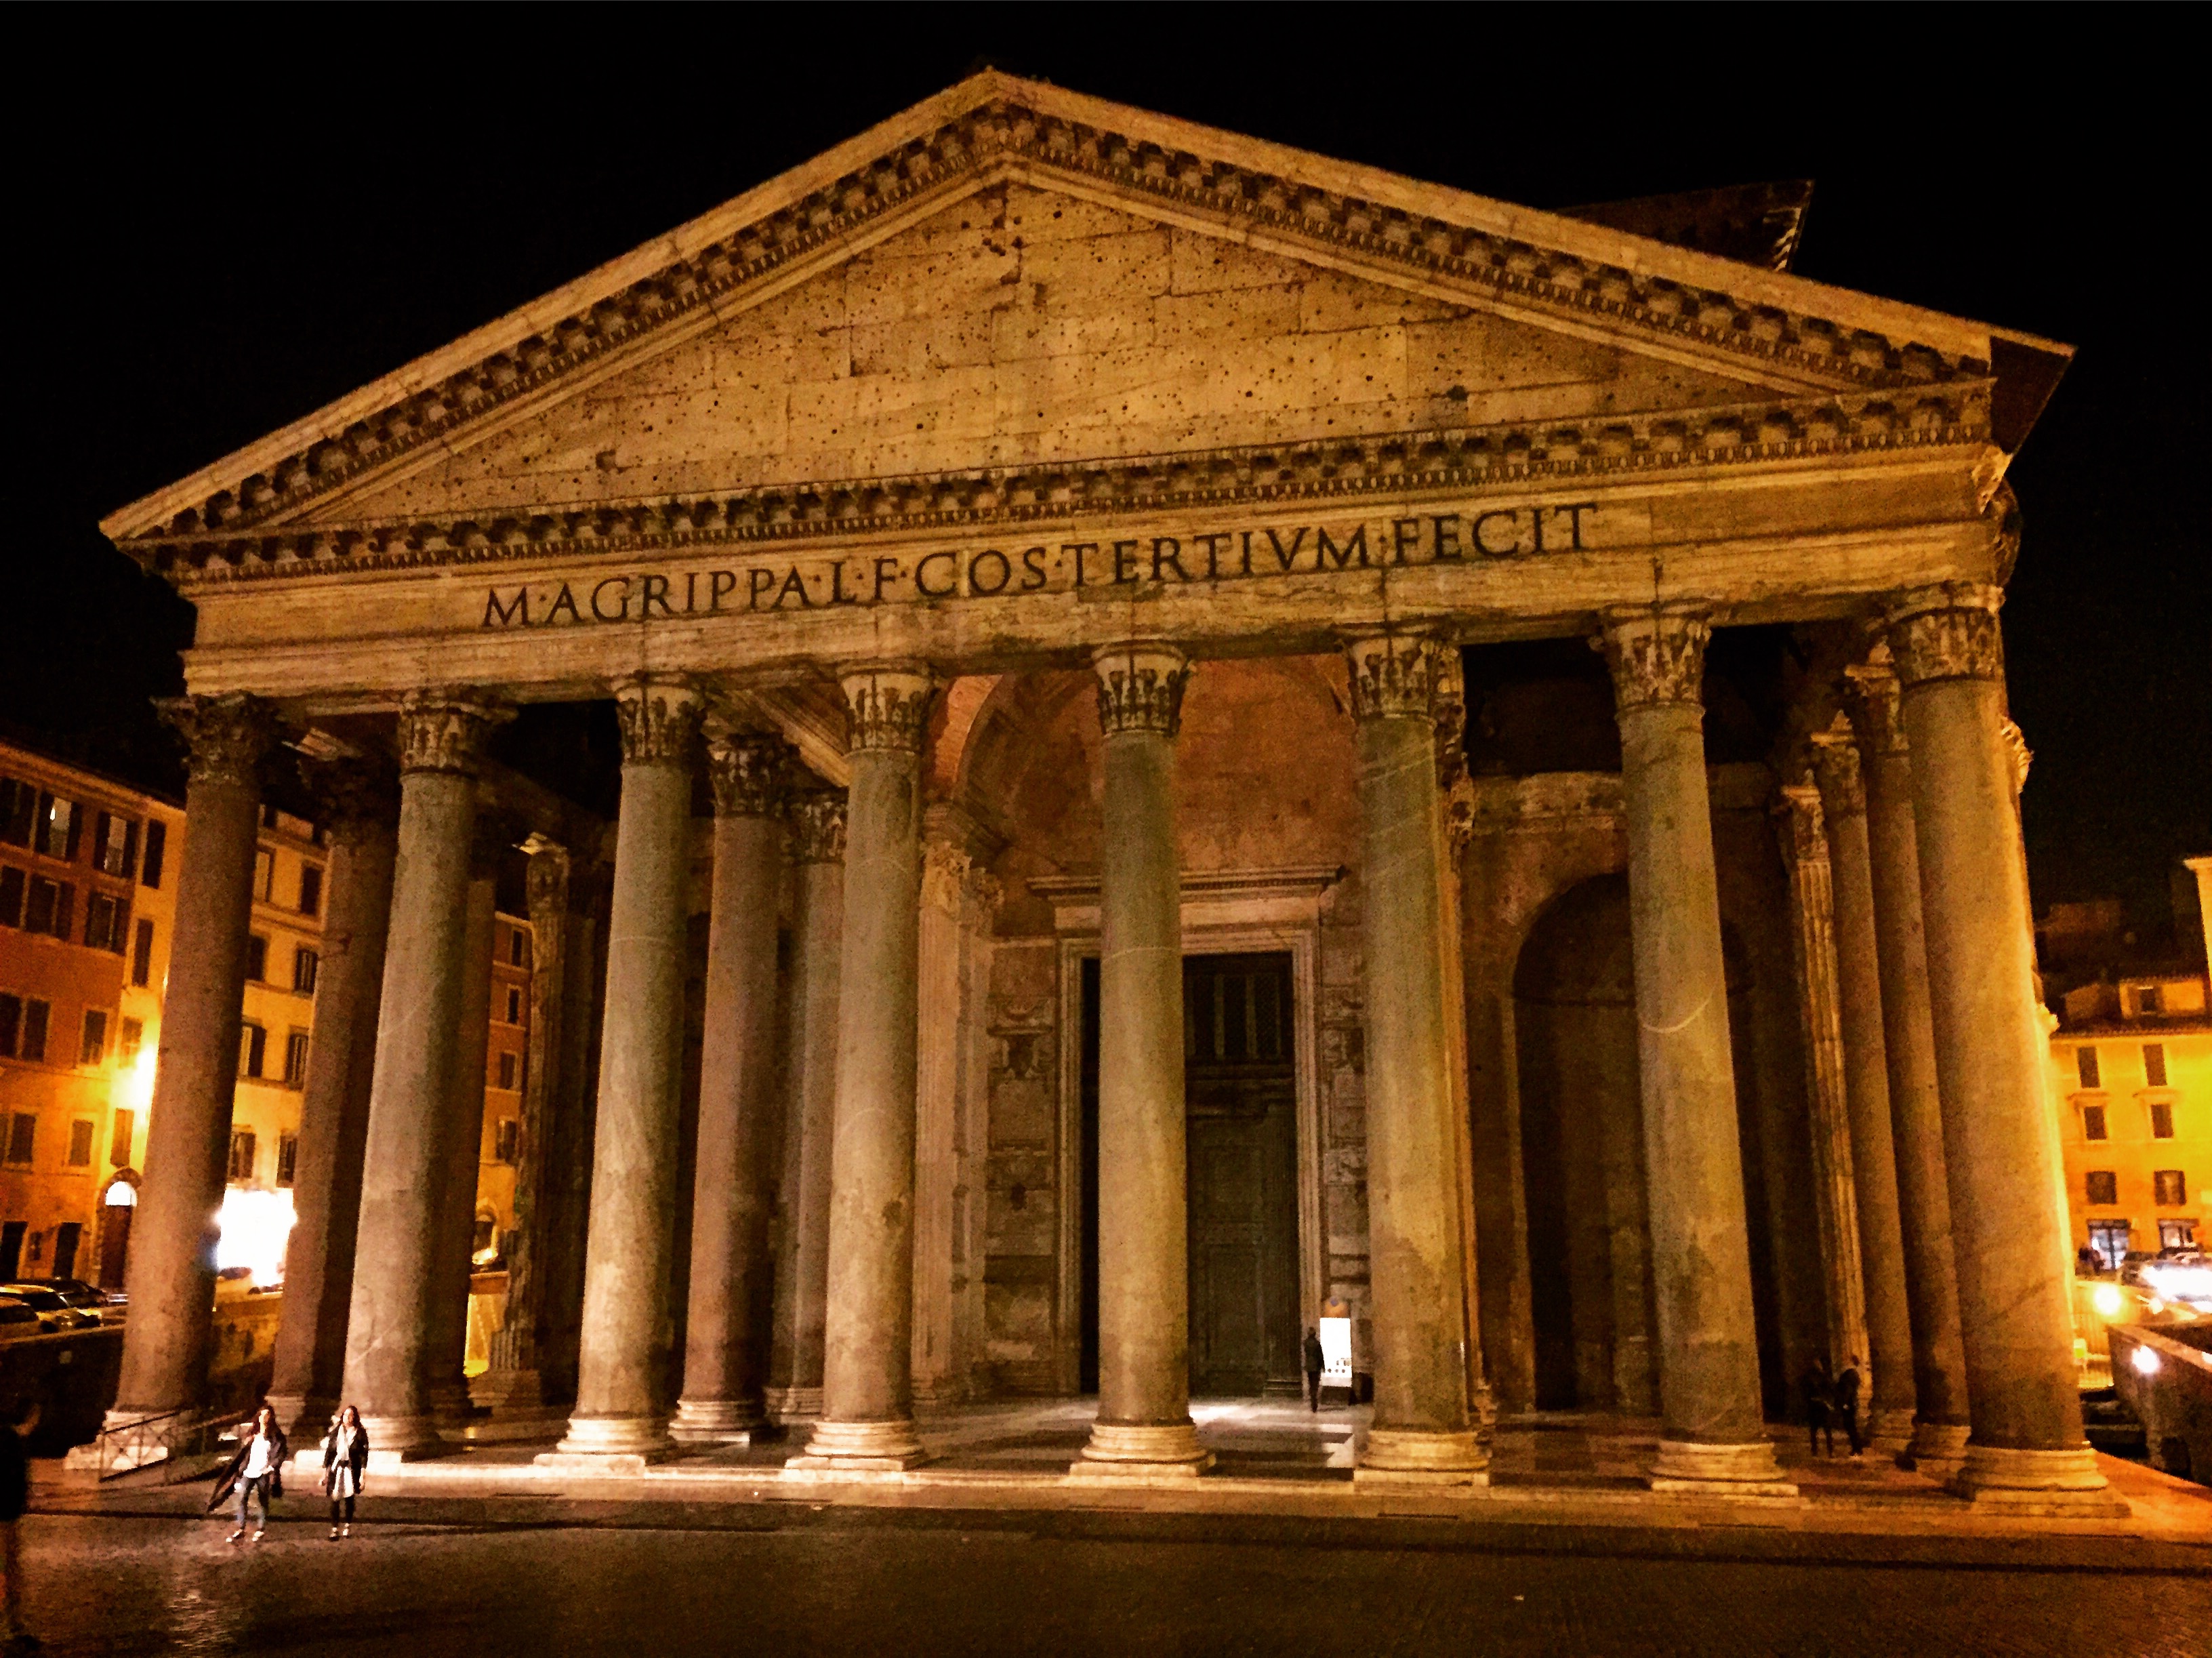 Pantheon, Rome with columns and a street at night